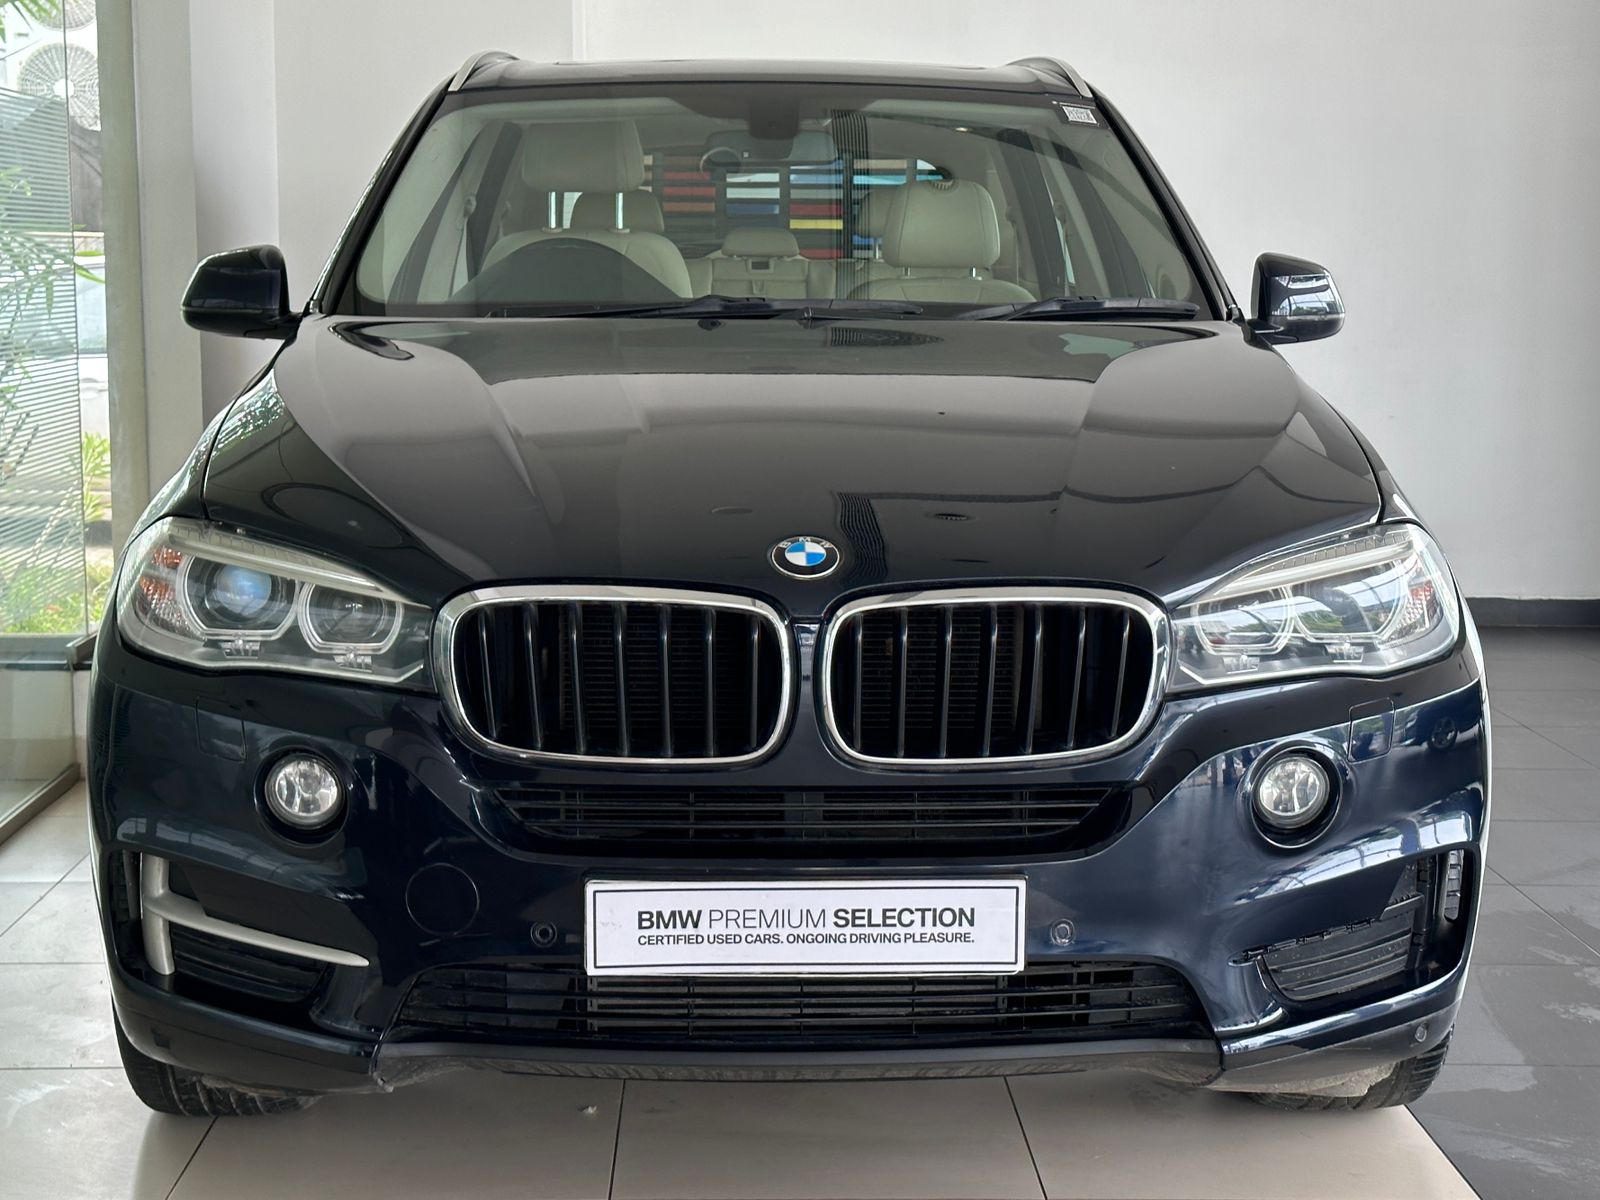 BMW X5 - 2015 model - 91439 kms front